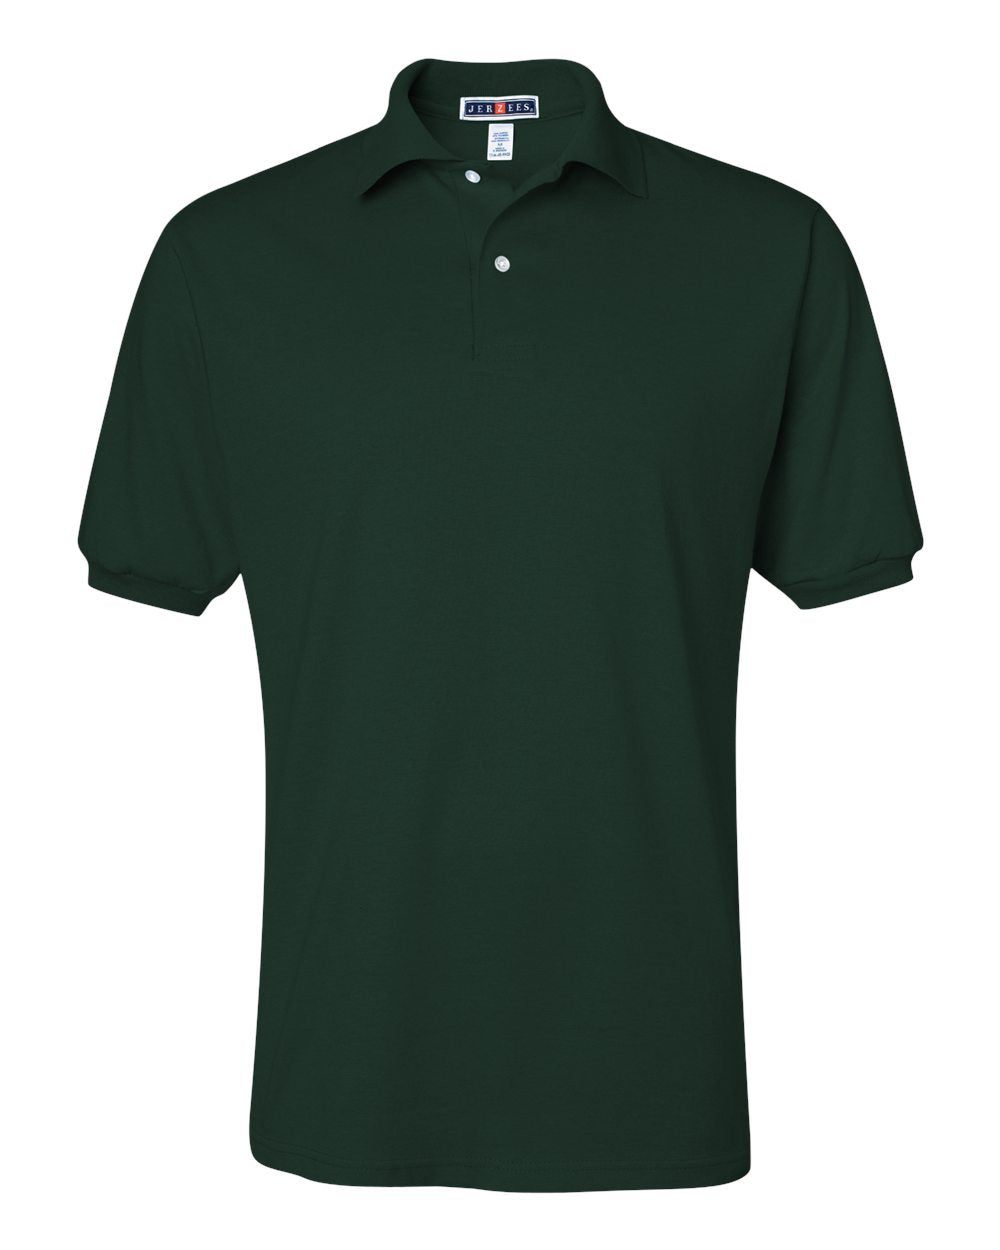 jerzees 50/50 polo forest green